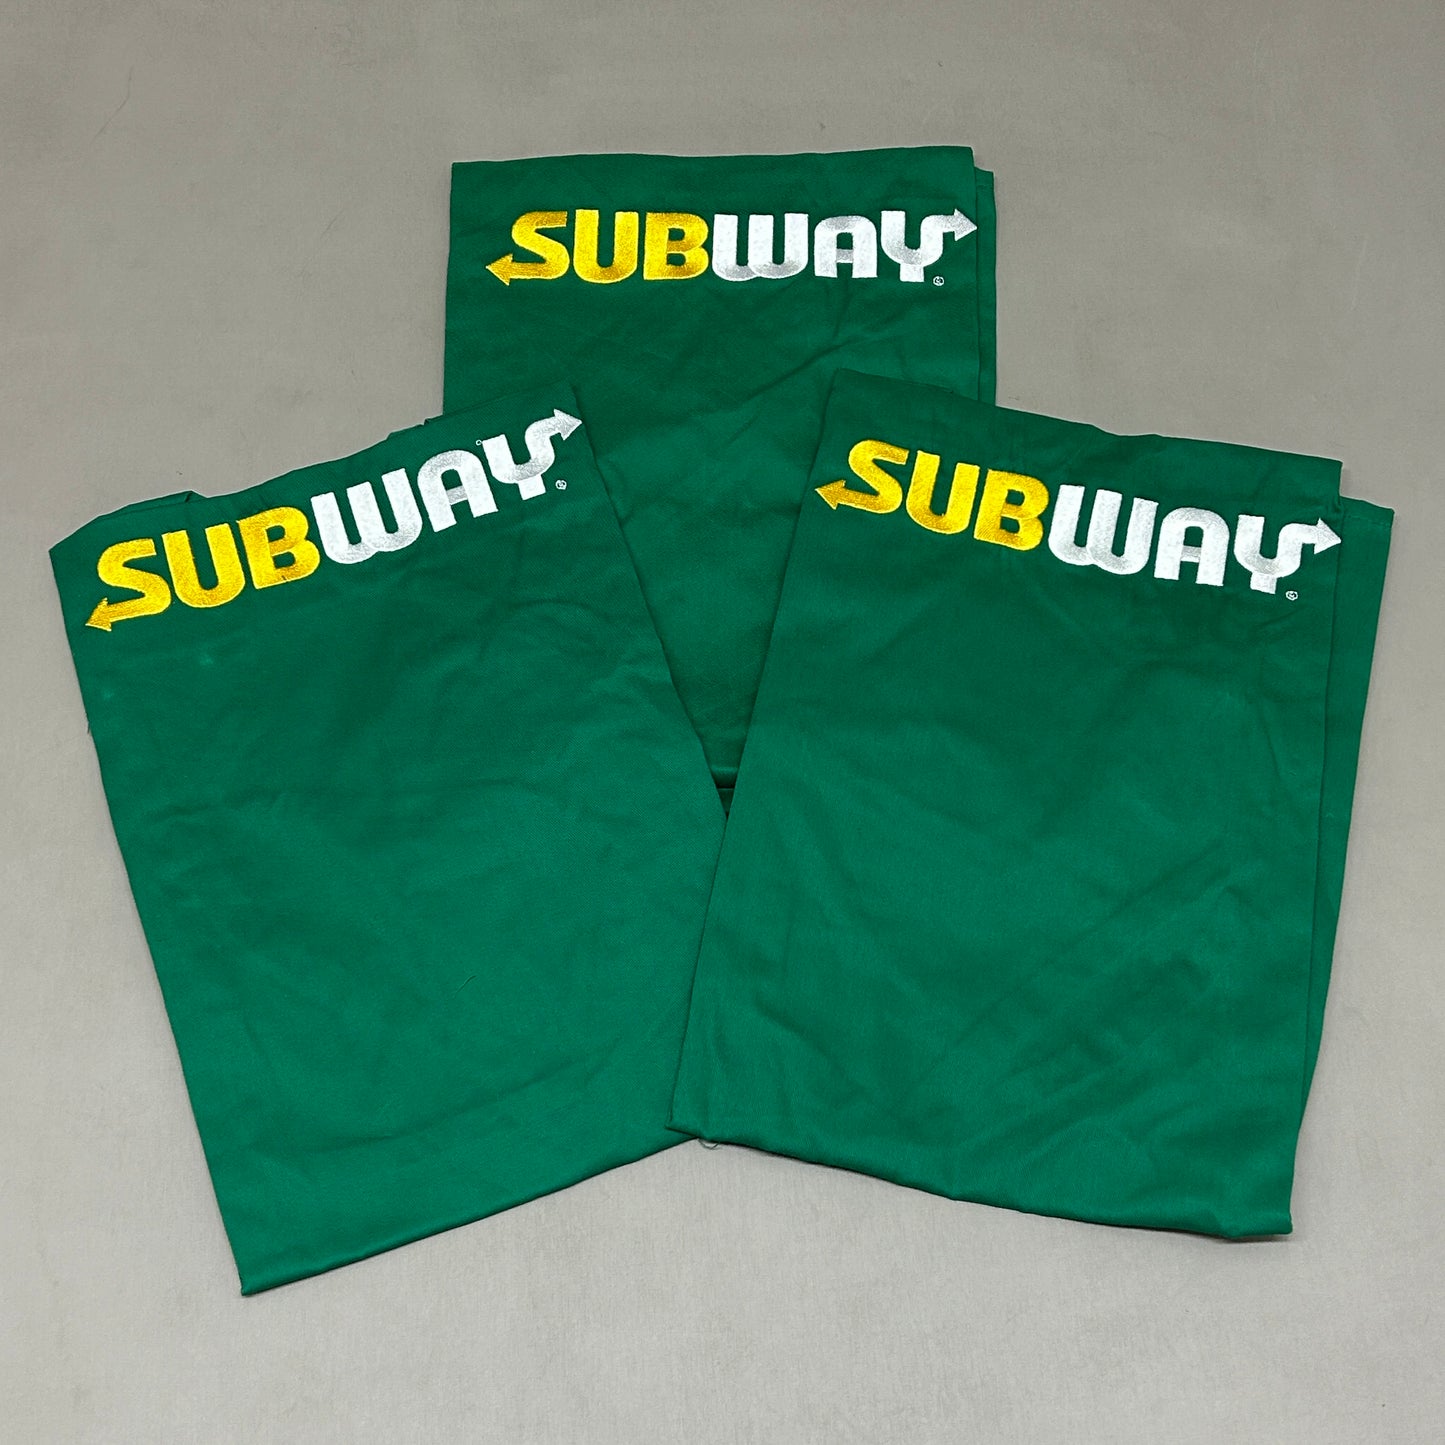 SUBWAY 3-Pack! Subway Full Size Aprons Green One Size (New)